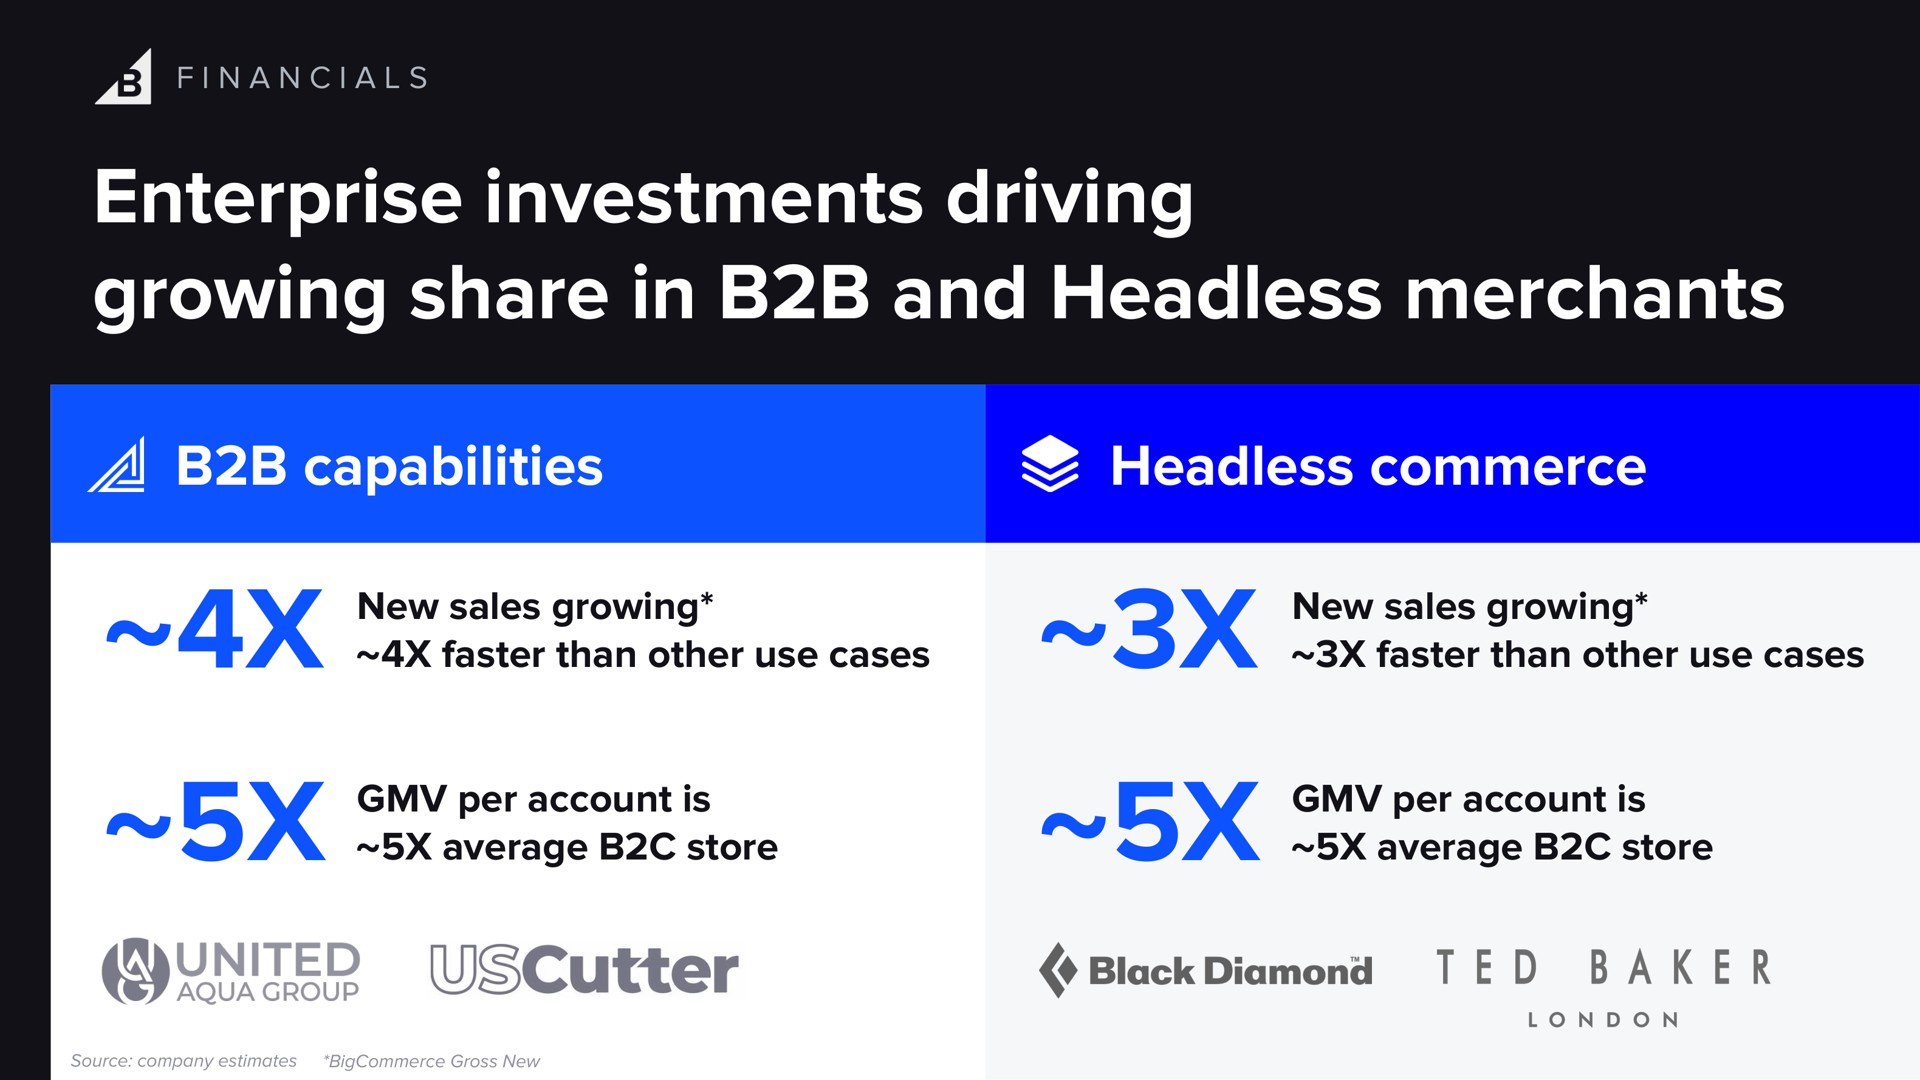 enterprise investments driving growing share in and headless merchants capabilities headless commerce baker ted | BigCommerce